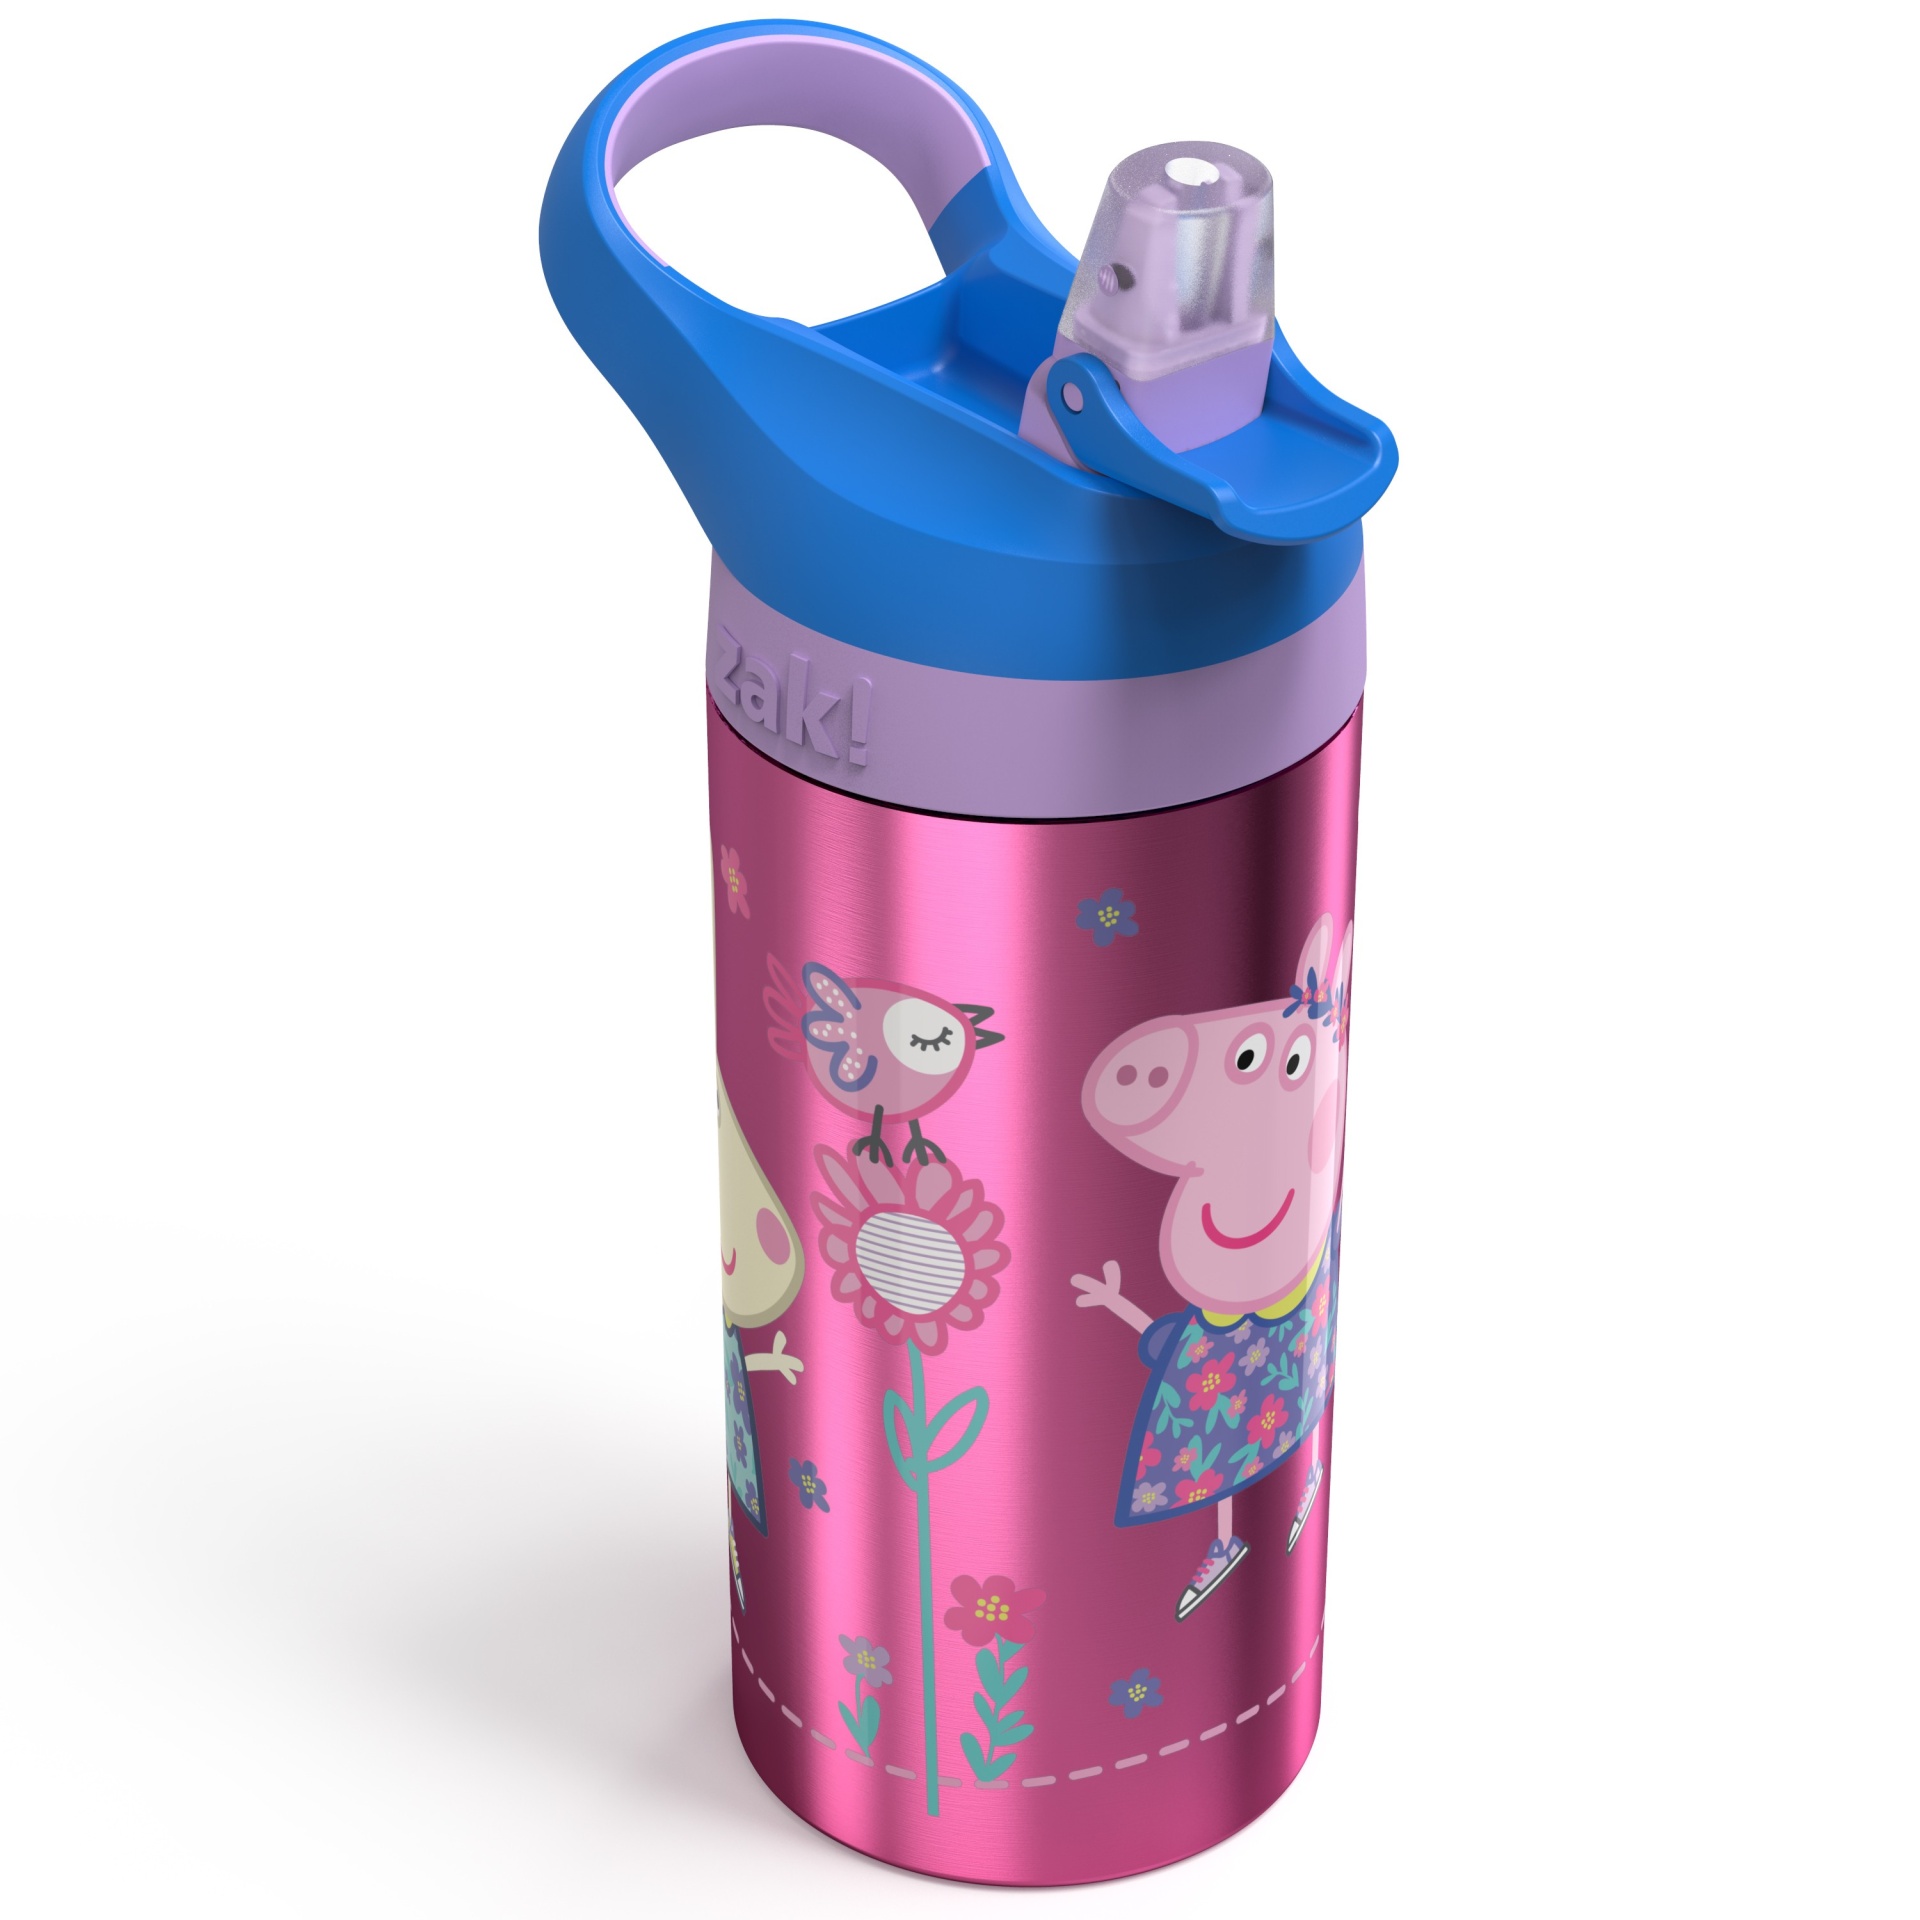 Buy Zak Nick Jr. Water Bottle with Straw - Peppa Pig - Zak Design,  delivered to your home